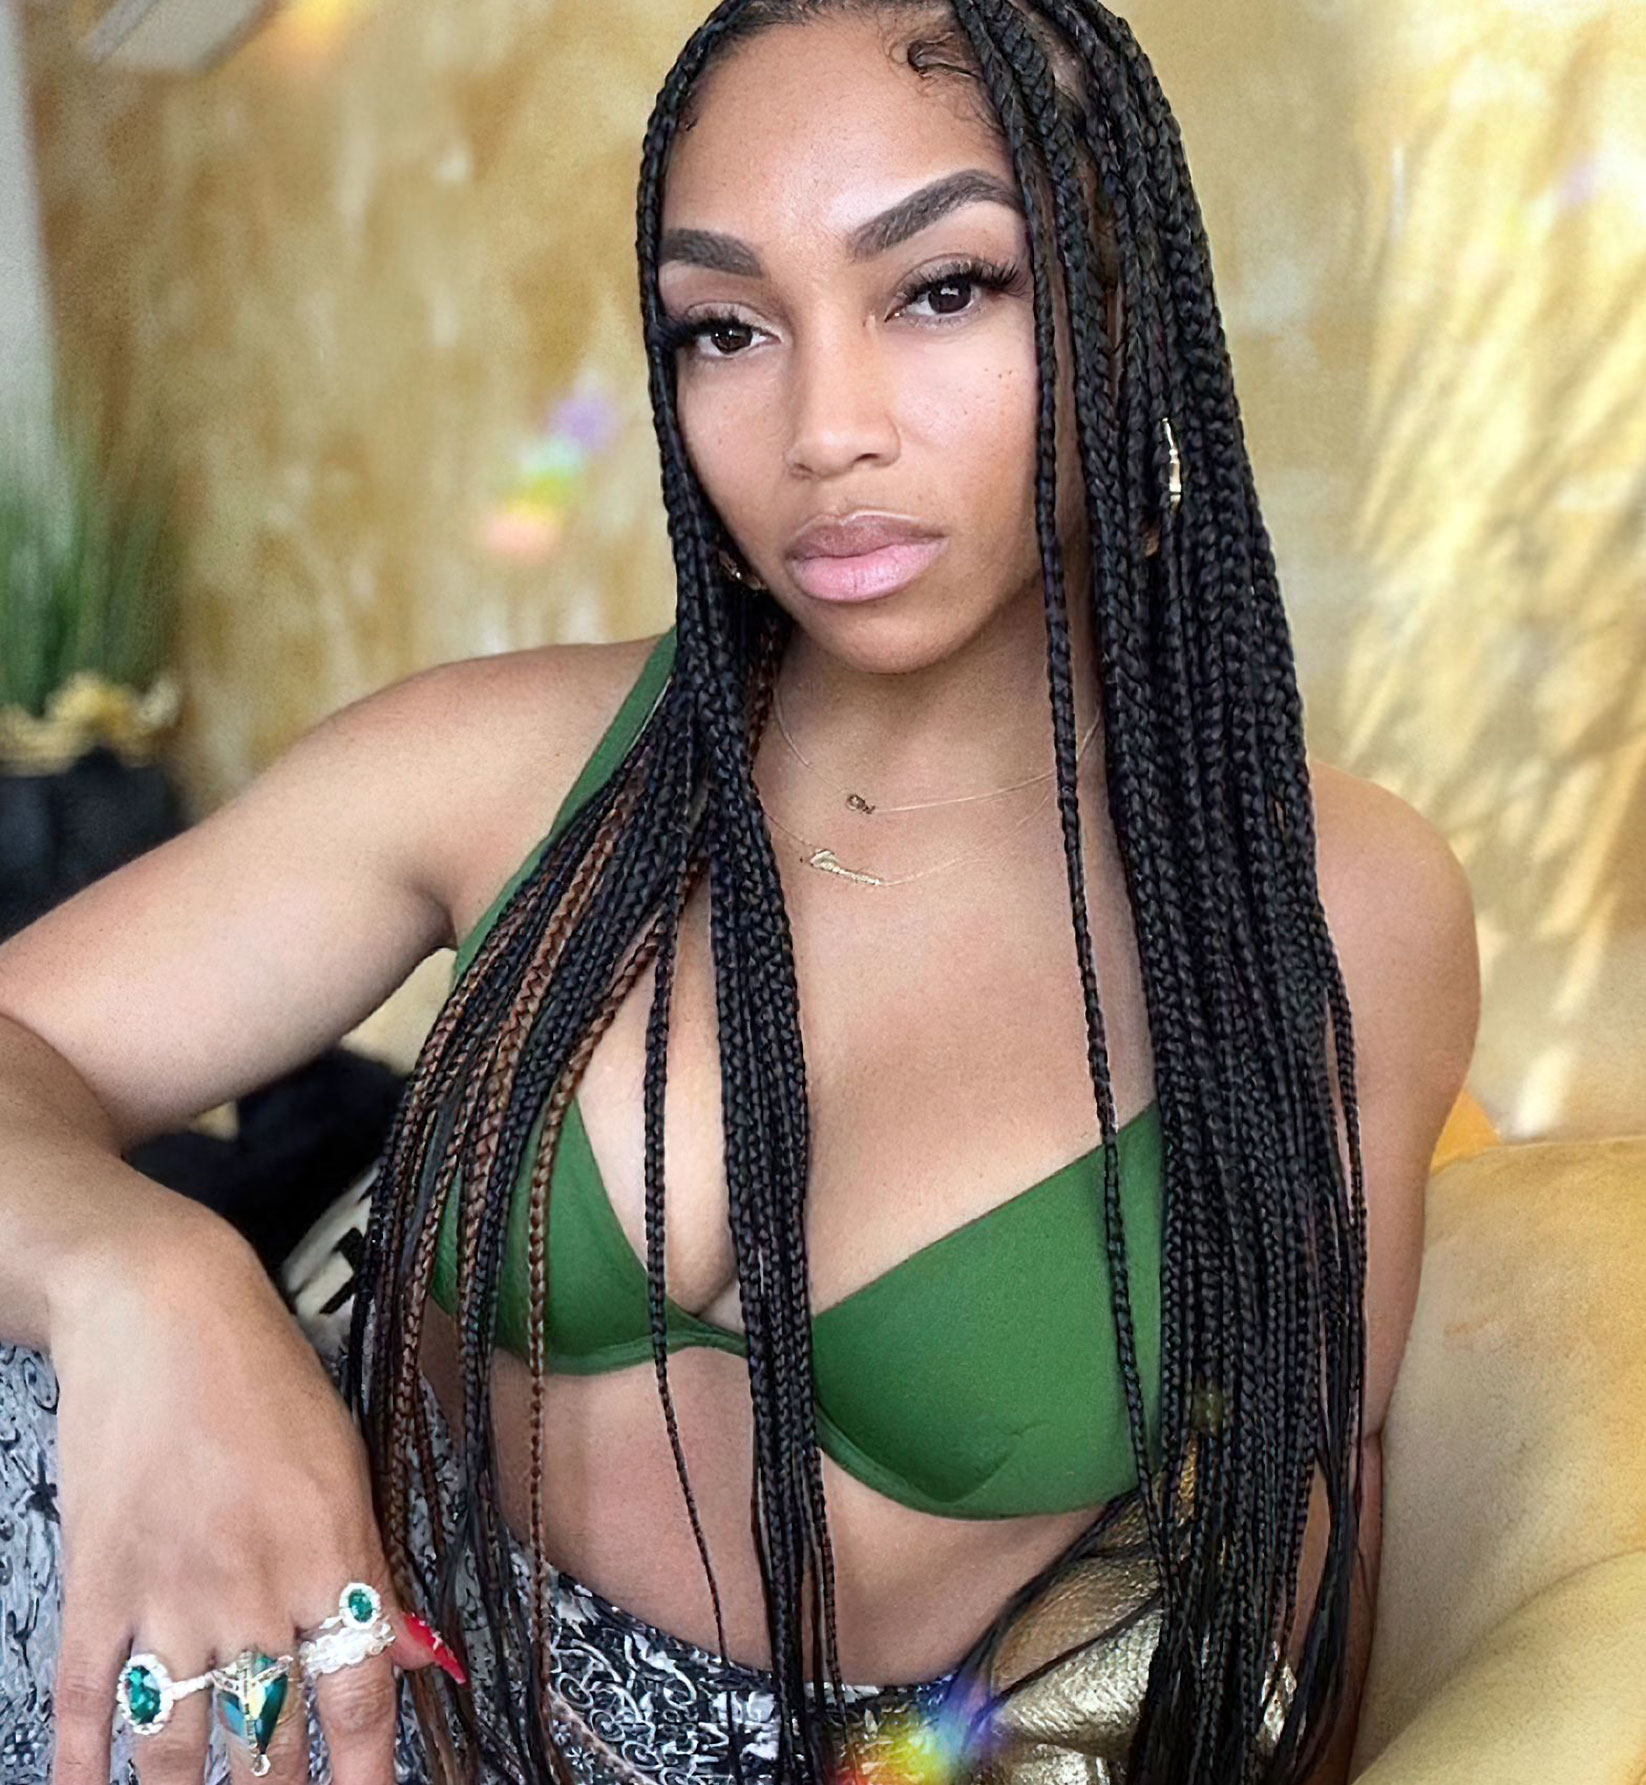 Take a look at Brooke Valentine’s partially nude and seductive augmented In...